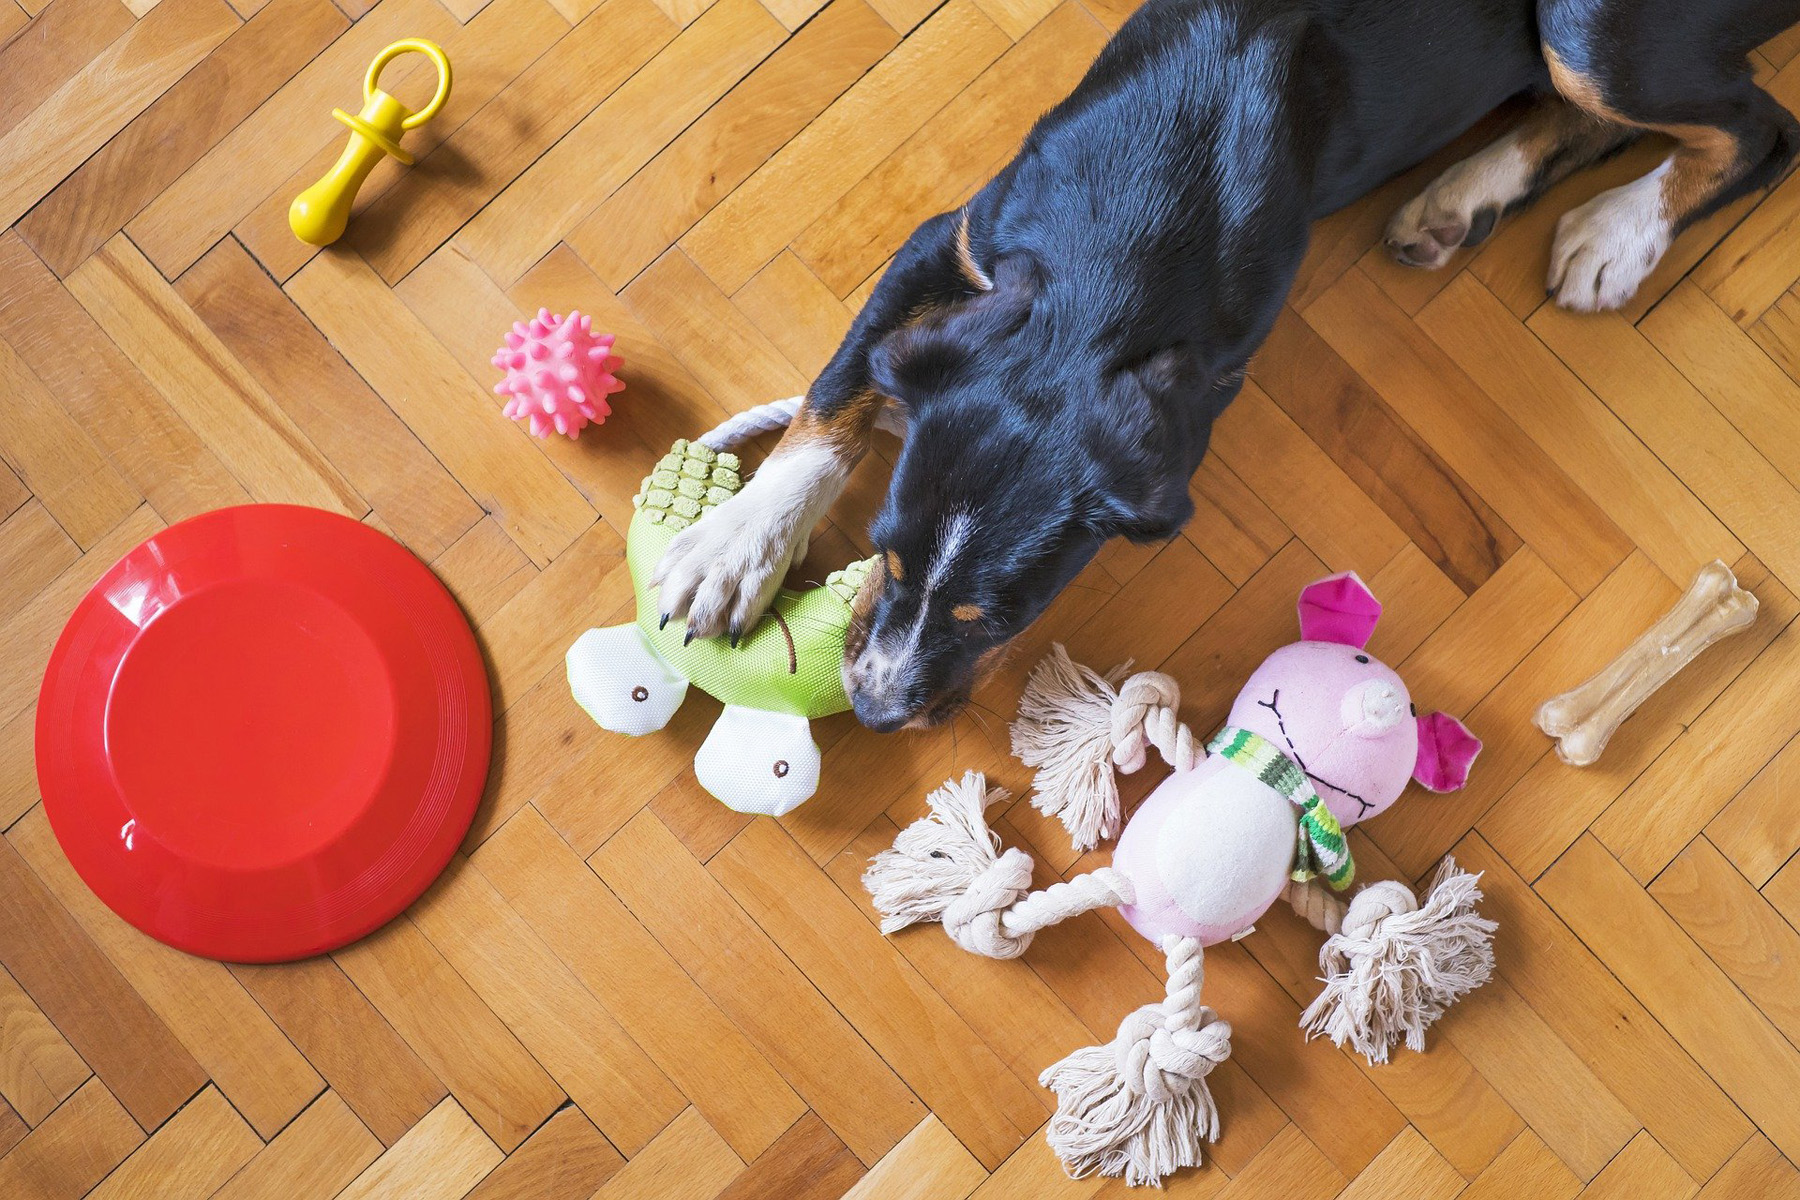 Talk to your veterinarian about the best toys for your dog, and recognize that the puppy may favor certain toys over others.